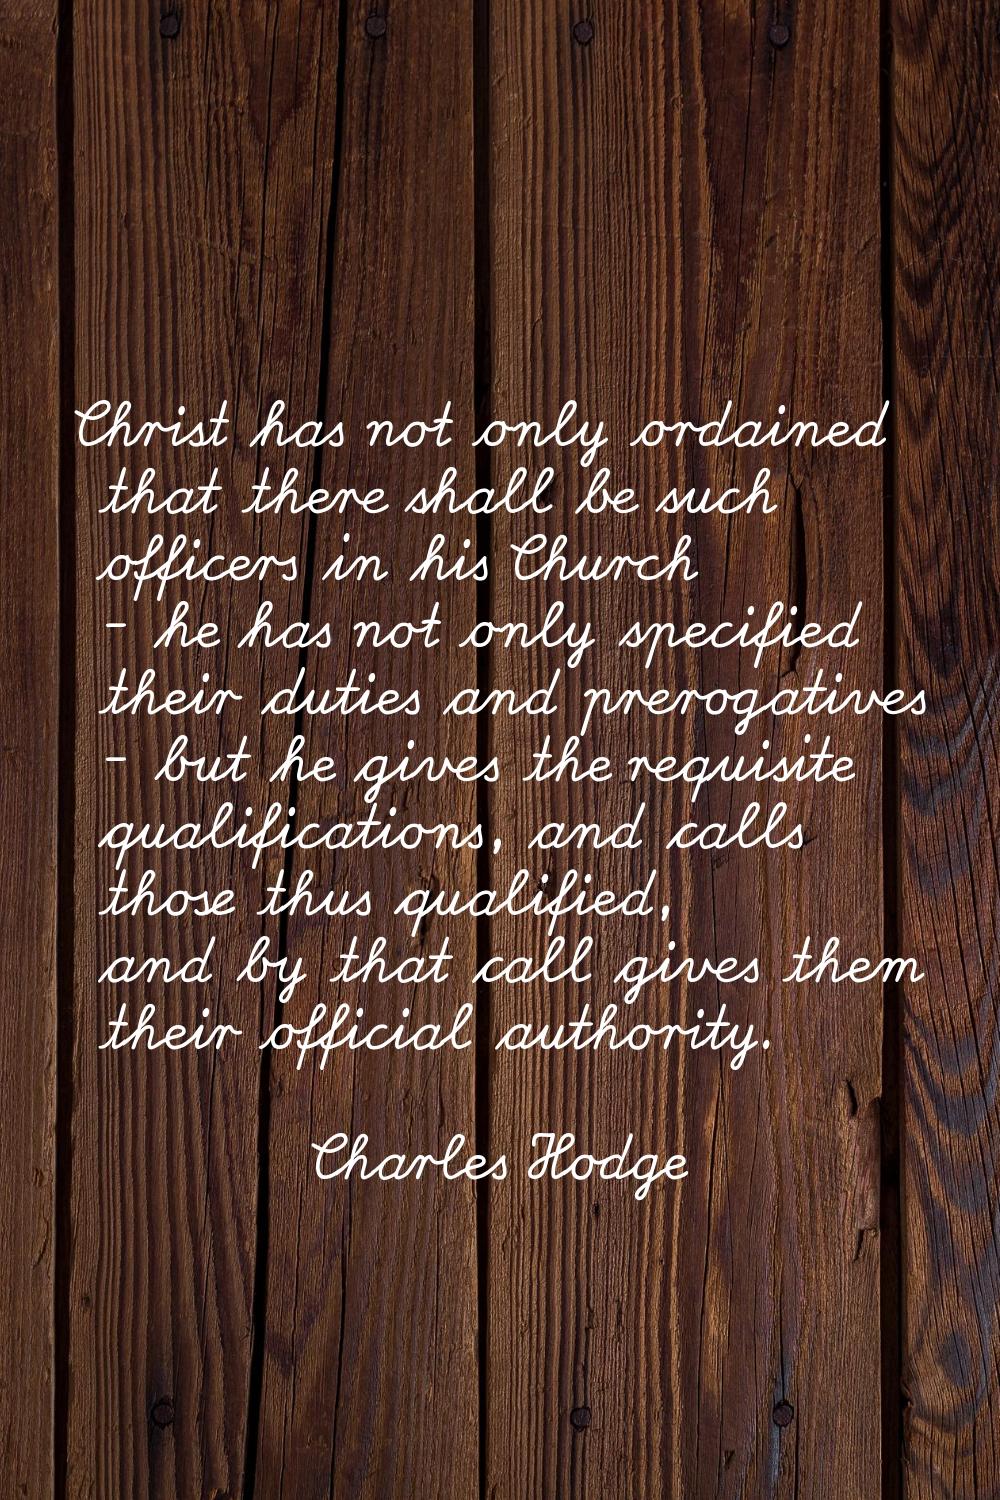 Christ has not only ordained that there shall be such officers in his Church - he has not only spec